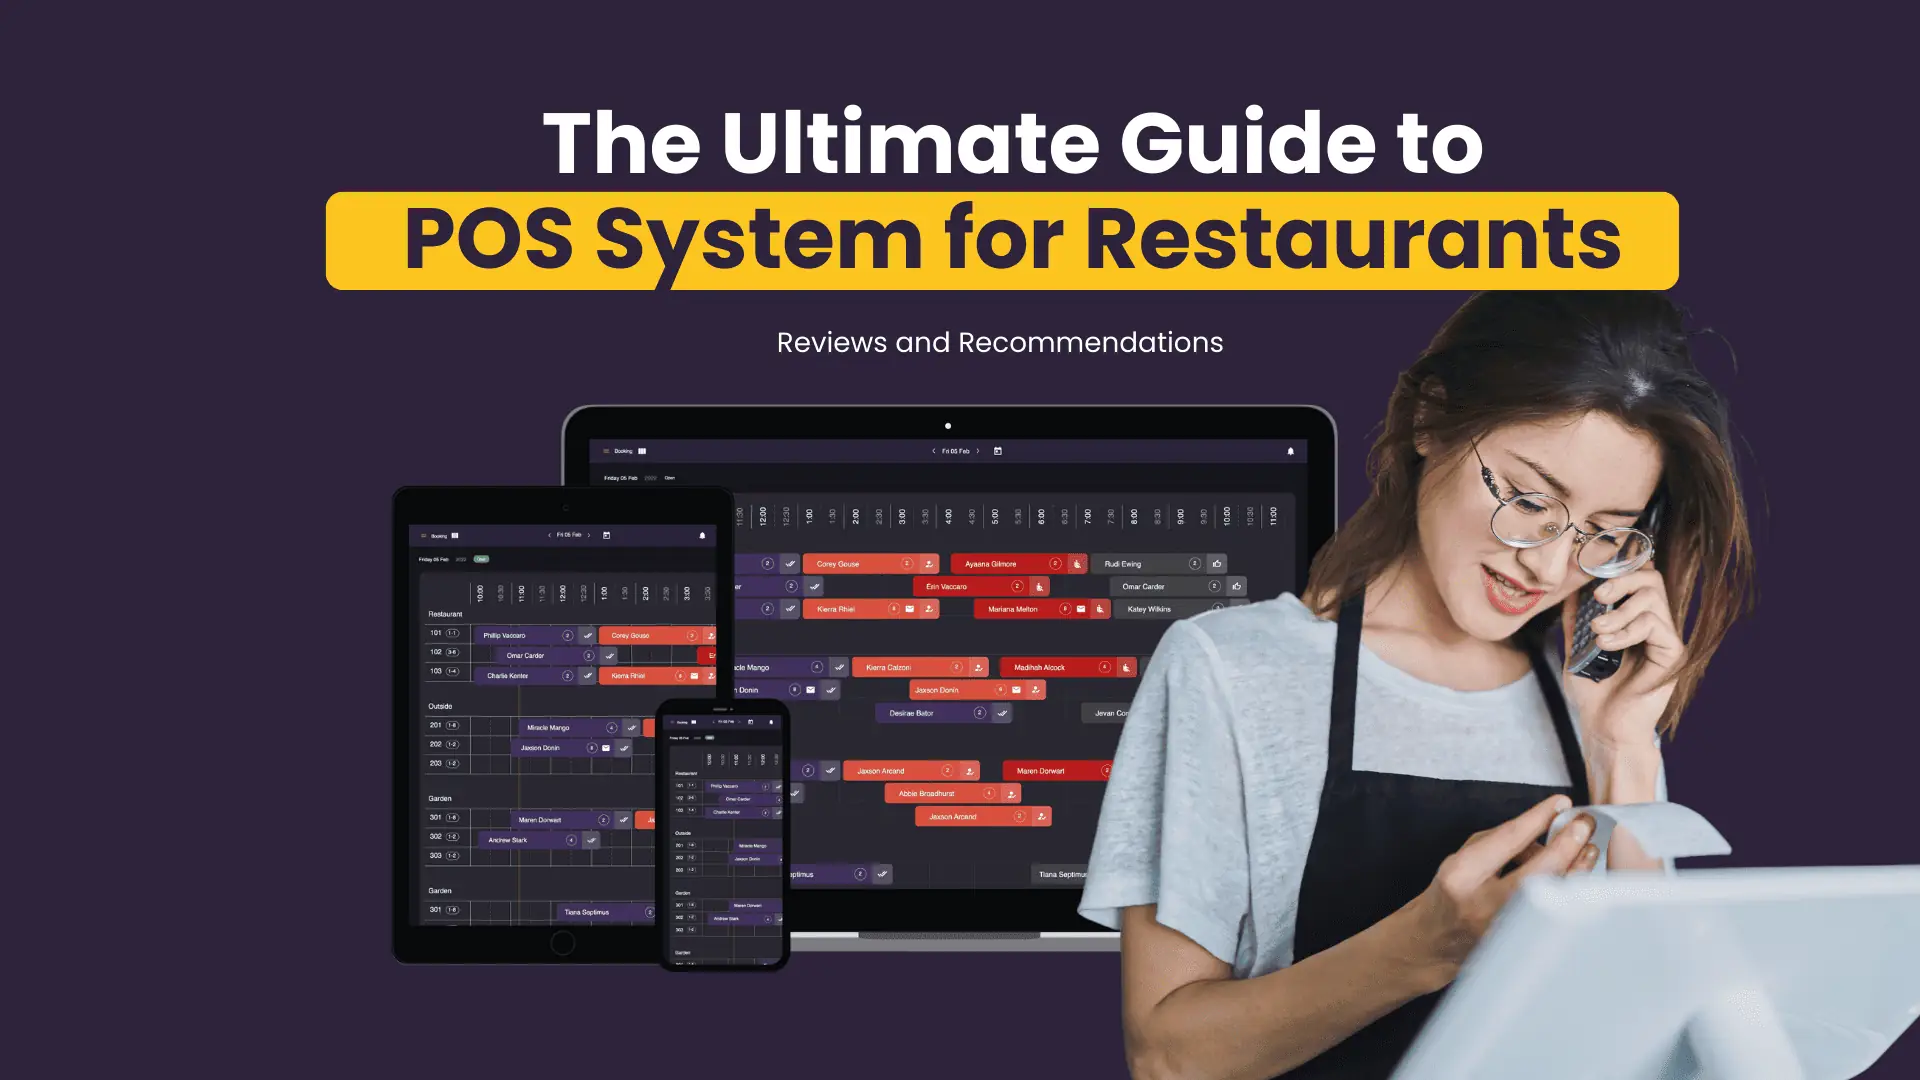 The Ultimate Guide to POS Systems for Restaurants: Reviews and Recommendations